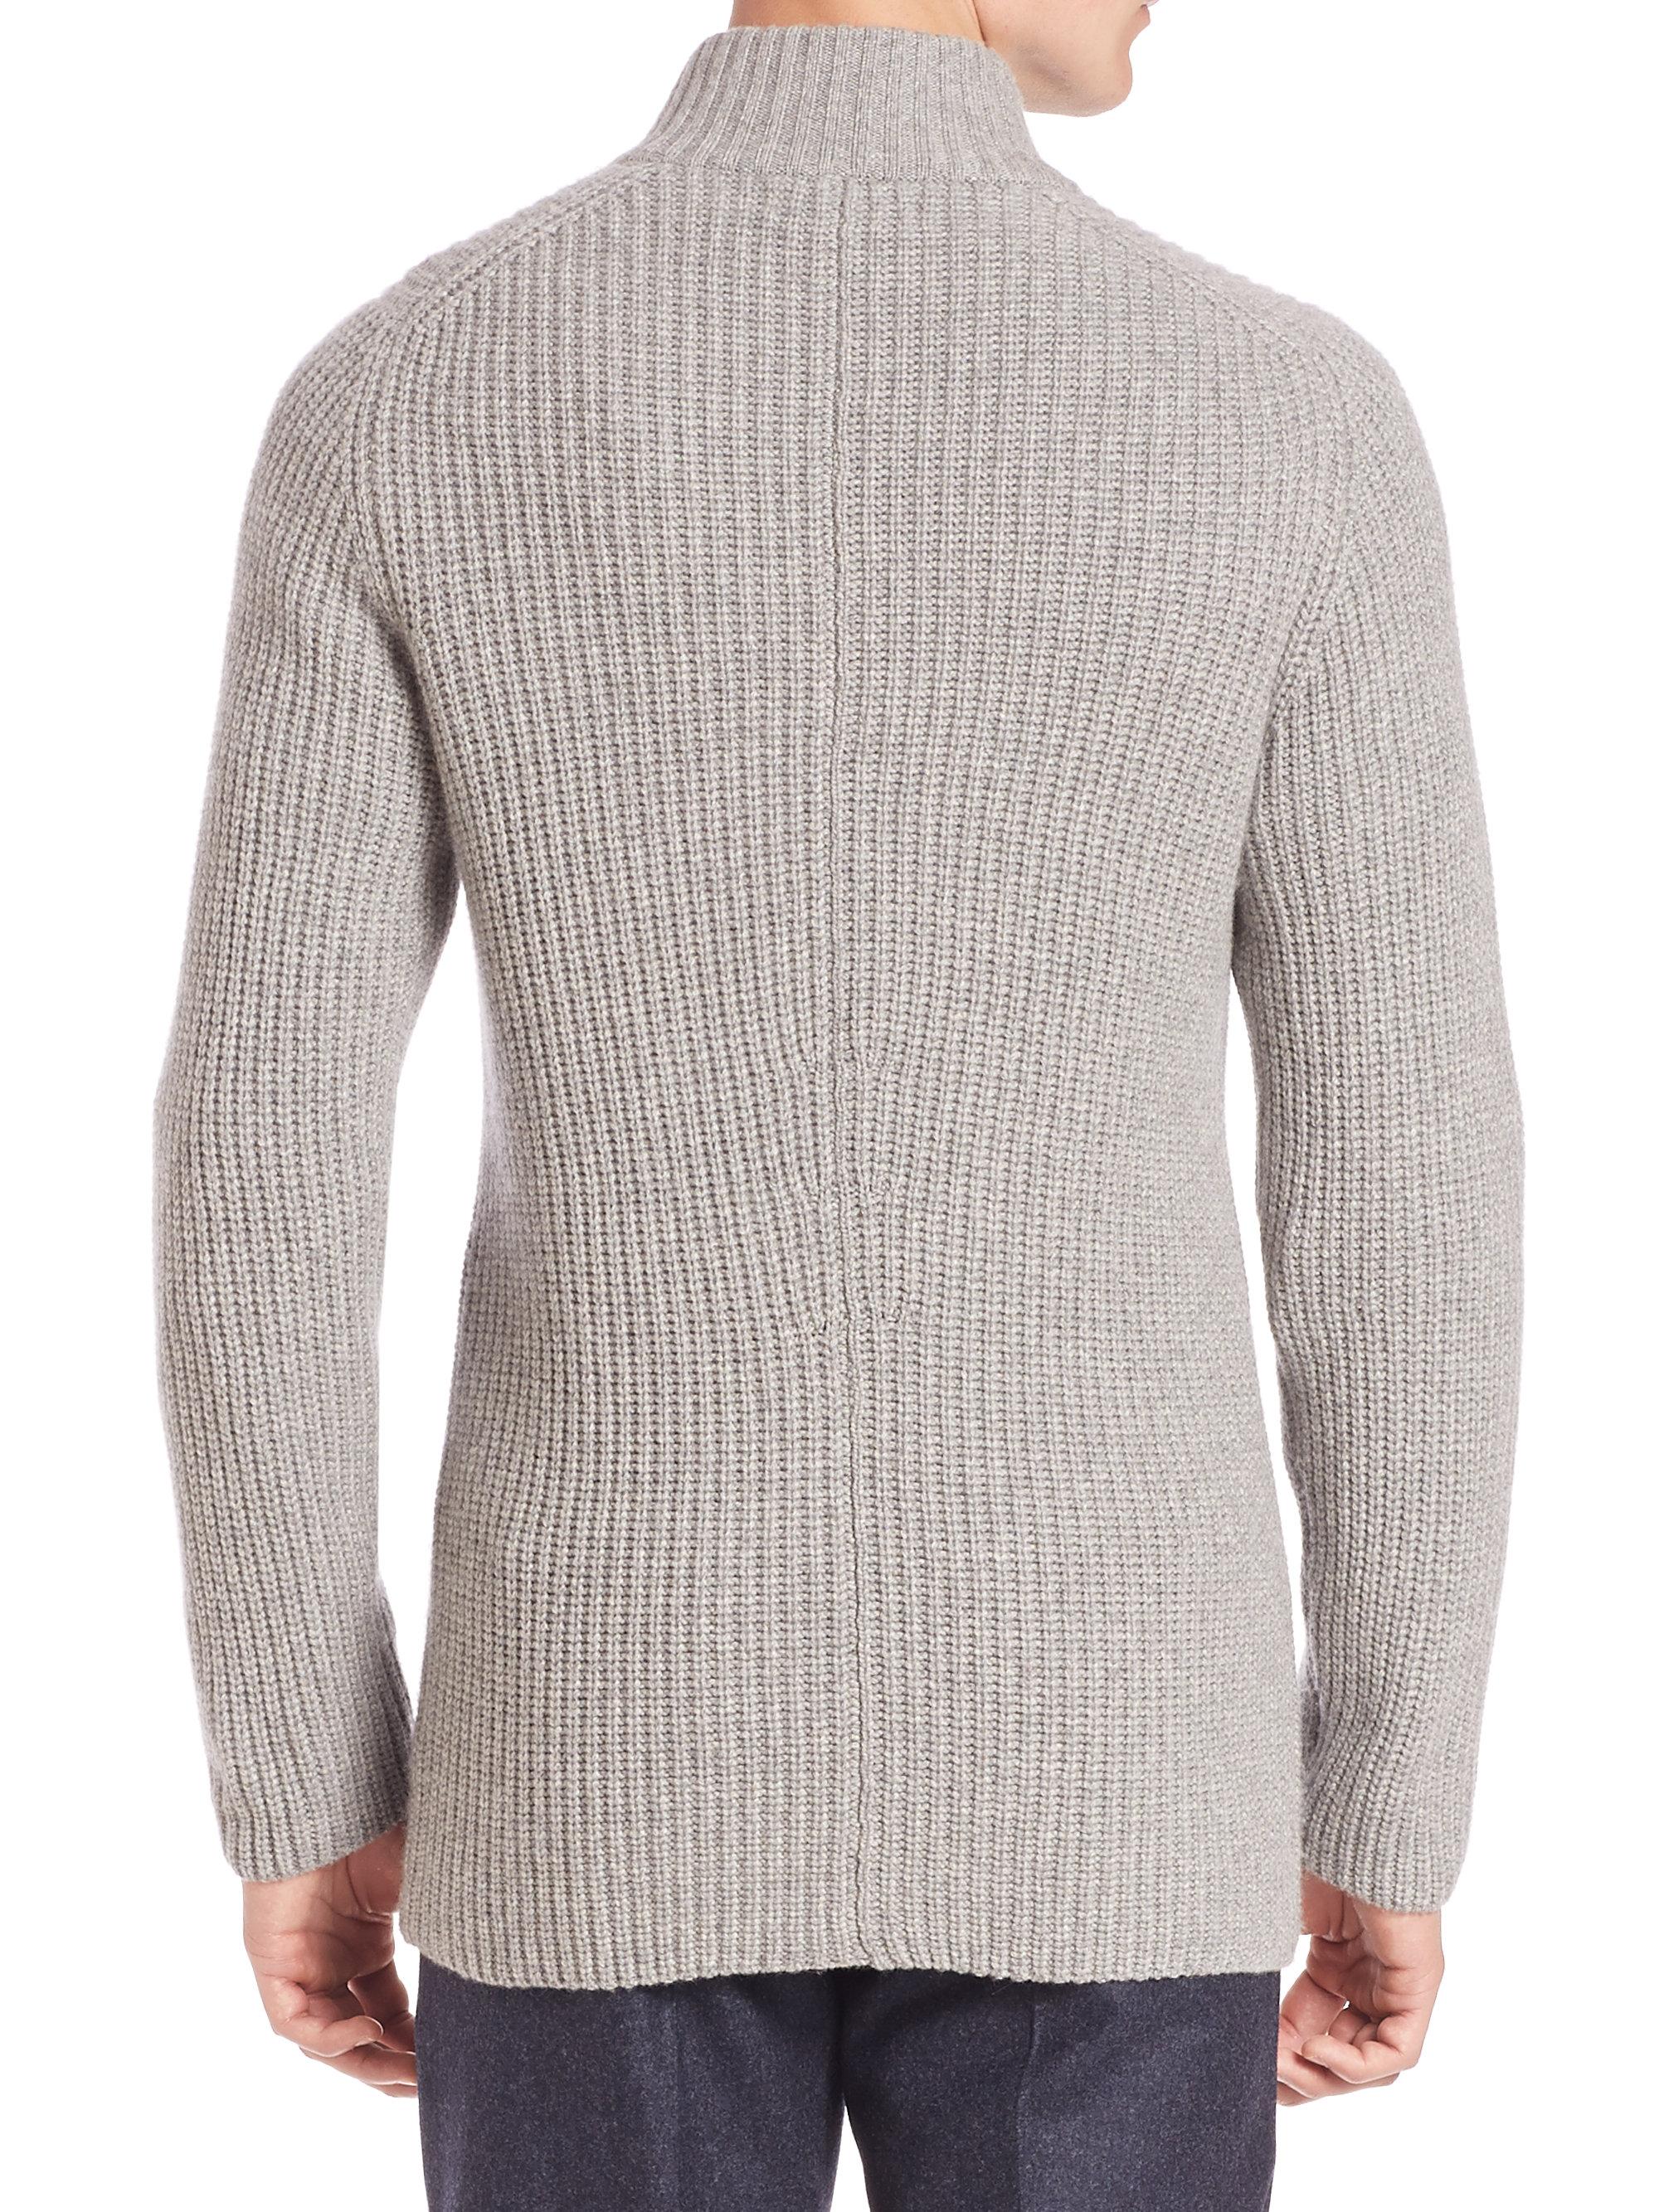 Brunello Cucinelli Double Breasted Cashmere Sweater in Gray for Men - Lyst